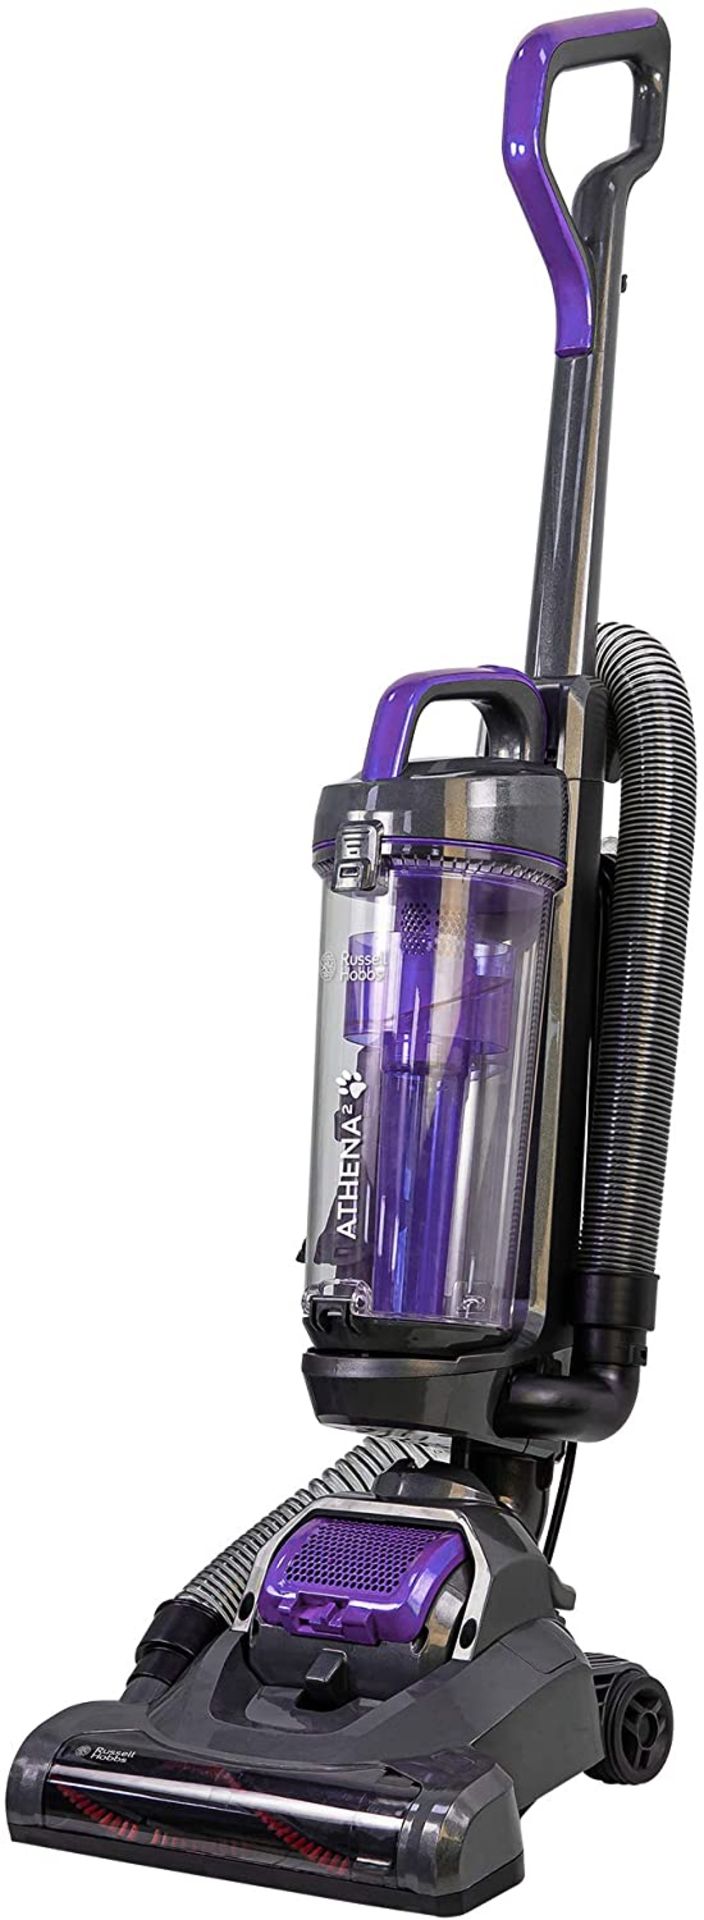 RUSSELL HOBBS ATHENA UPRIGHT VACUUM CLEANER RRP £66.99Condition ReportAppraisal Available on